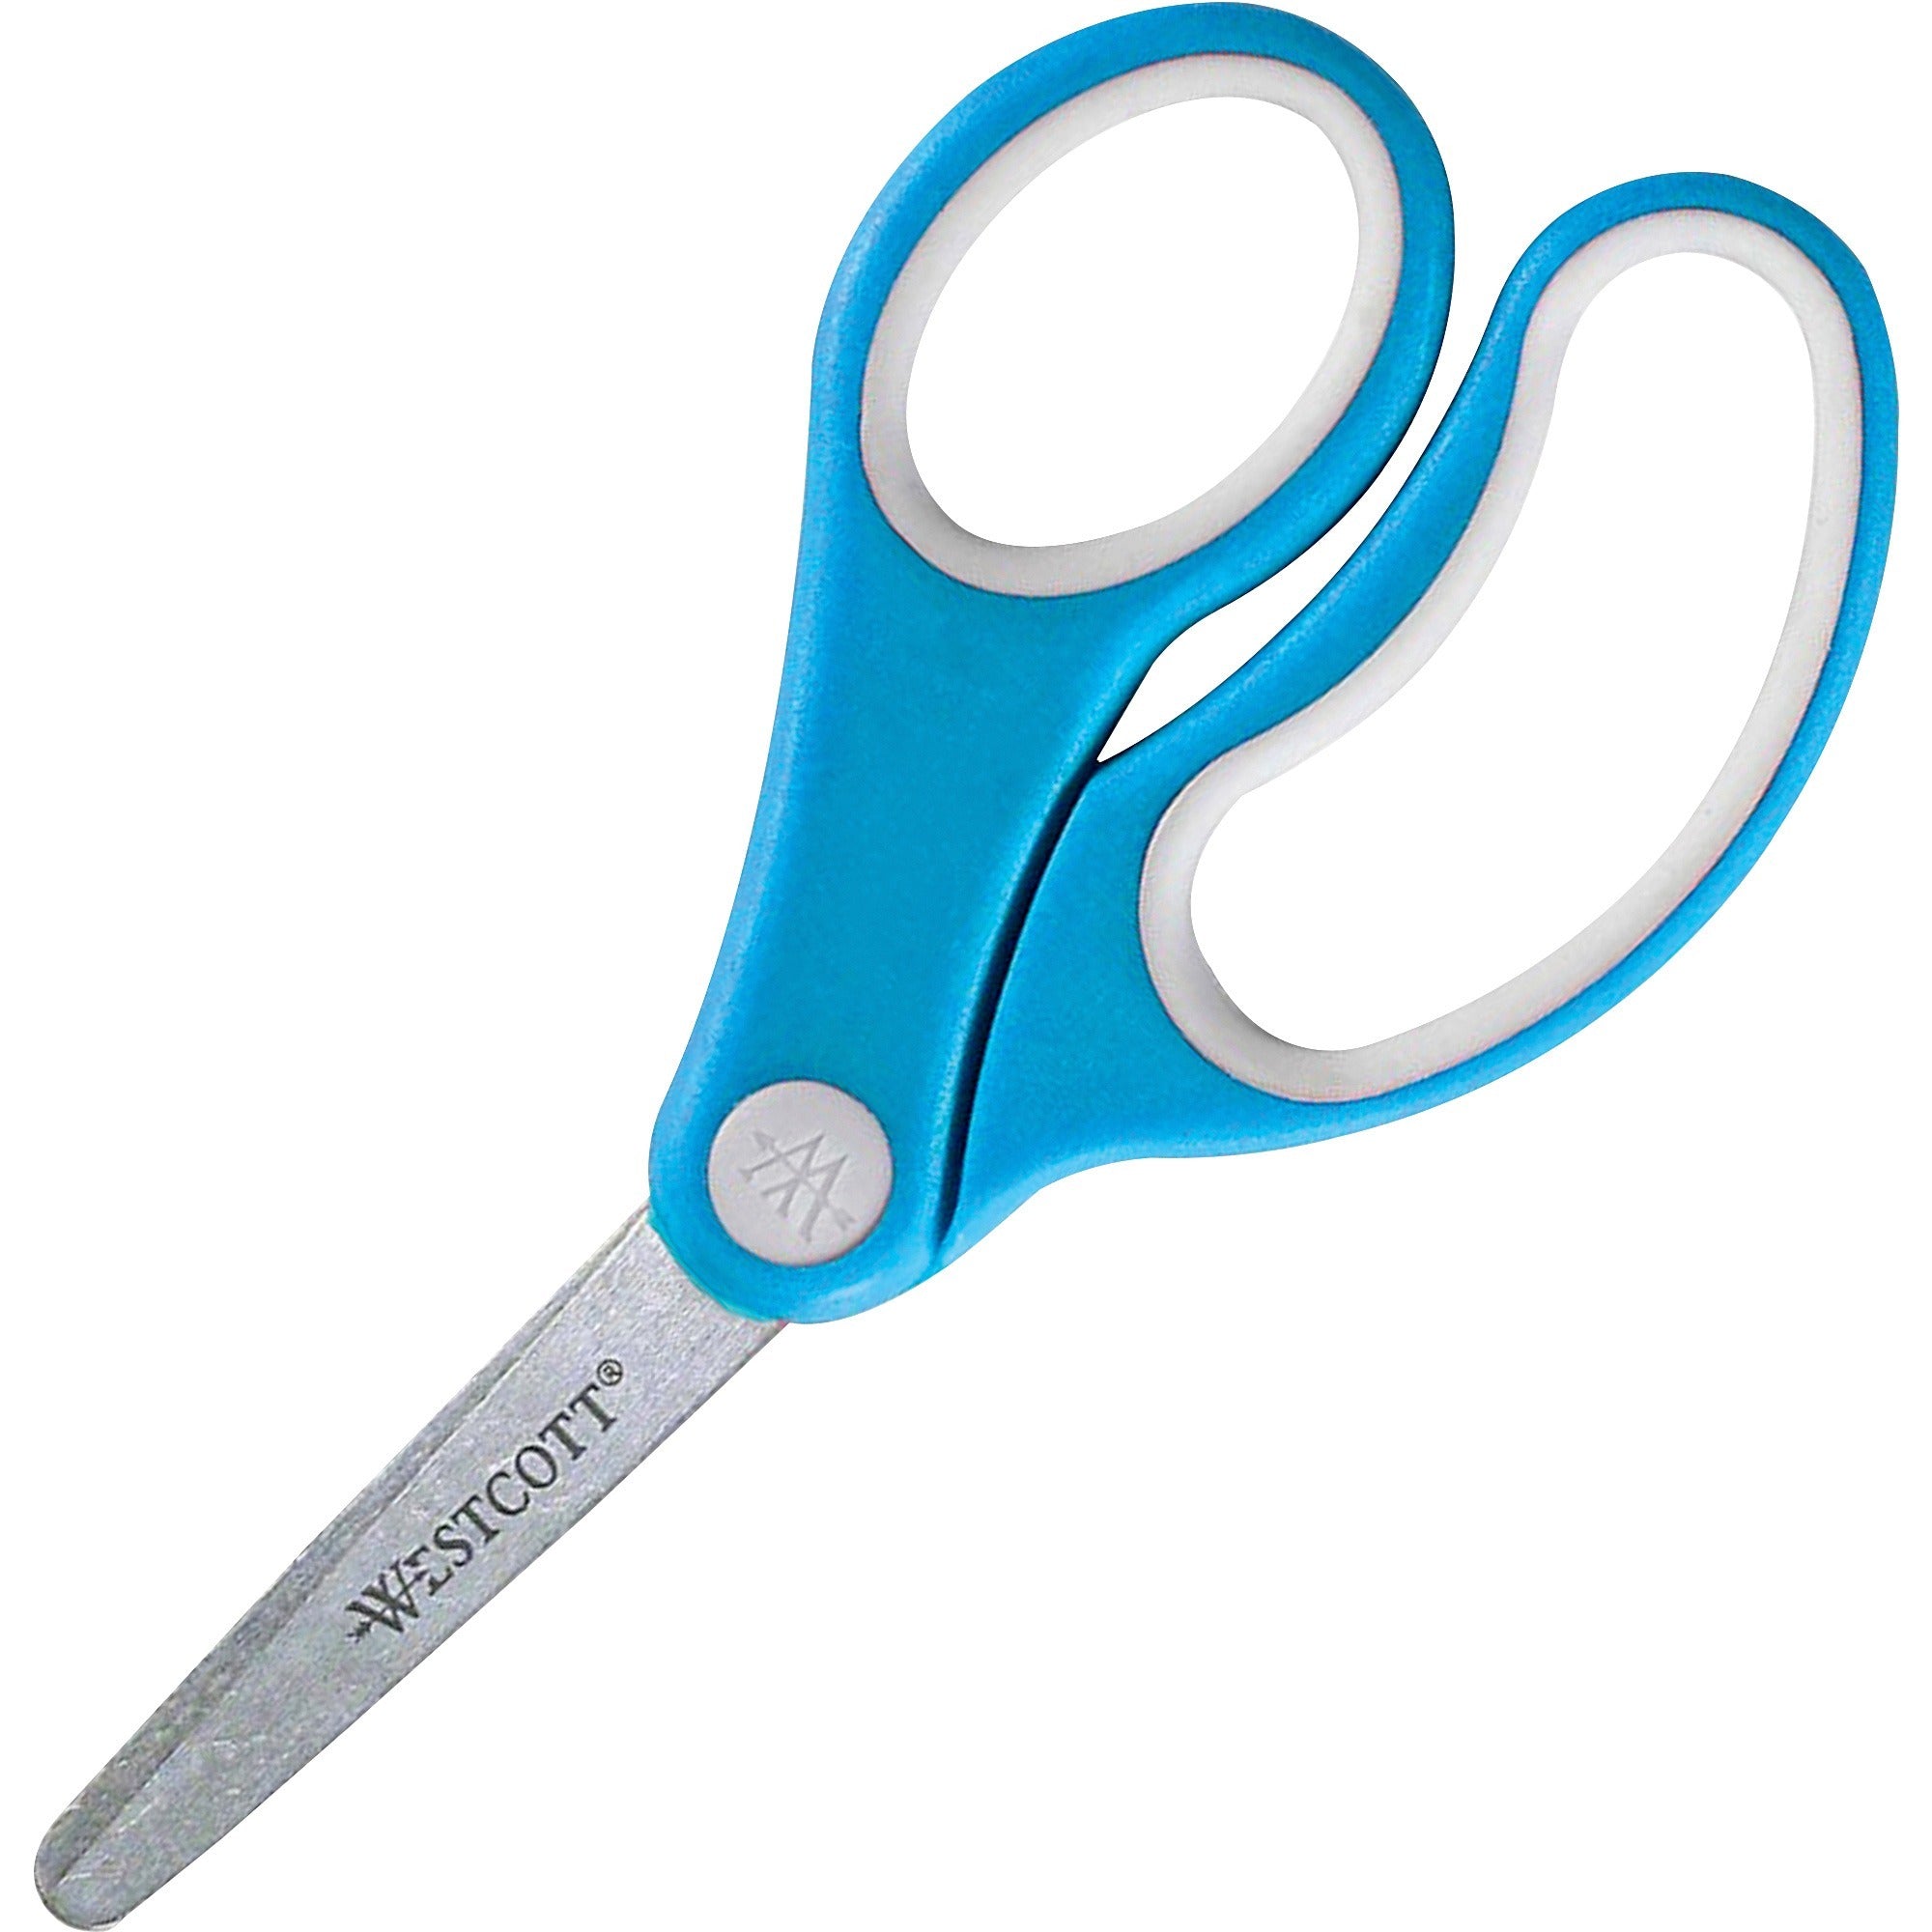 Westcott Soft Handle 5" Blunt Kids Value Scissors - 5" Overall Length - Left/Right - Stainless Steel - Blunted Tip - Assorted - 1 Each - 